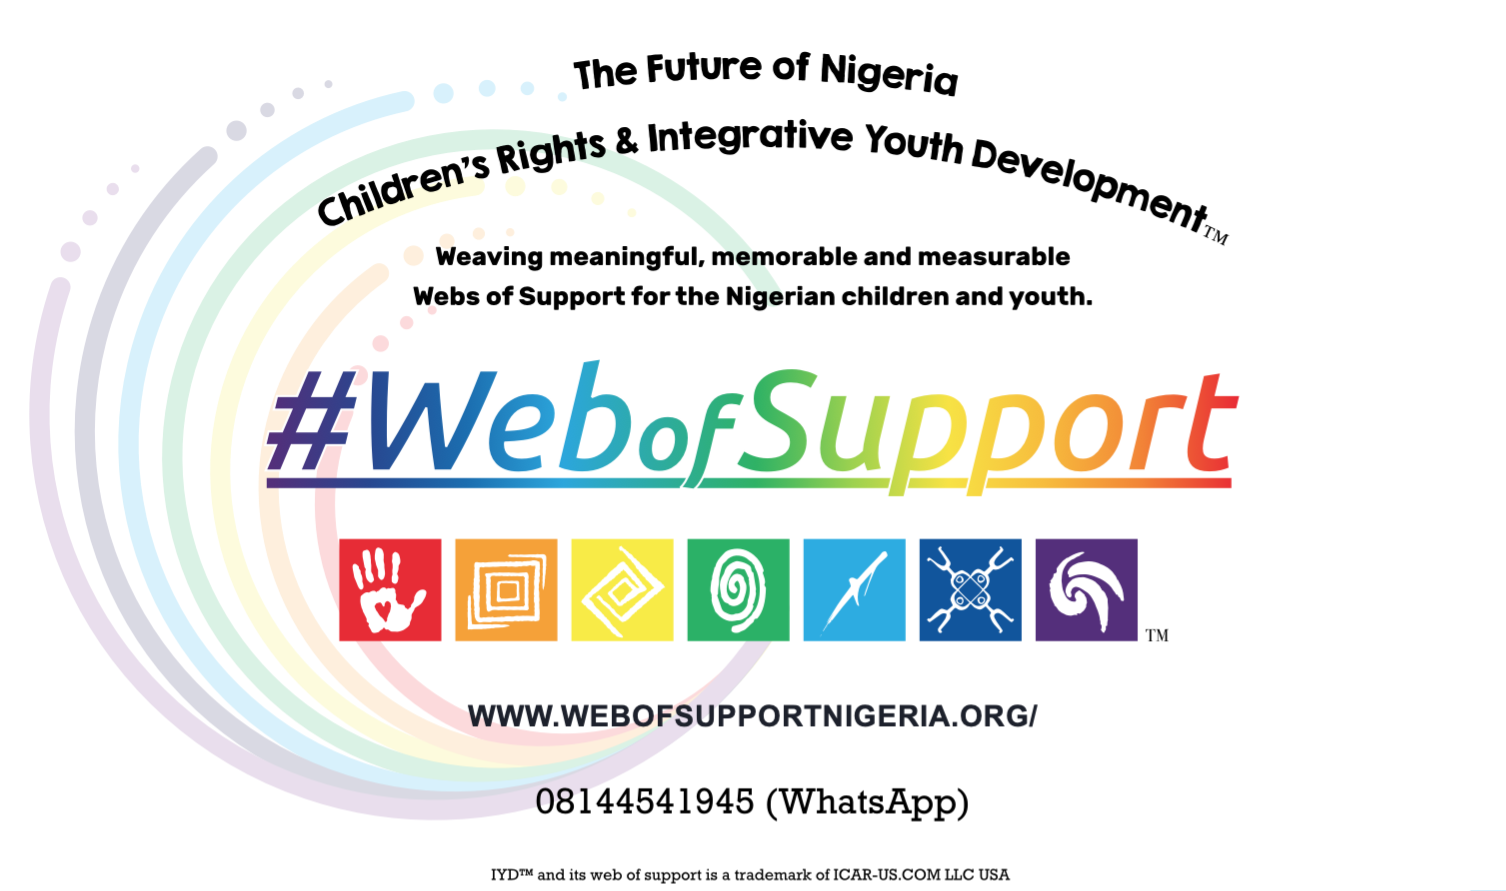 Nigeria's banner announcing the work of IYD™ and Children's Rights.